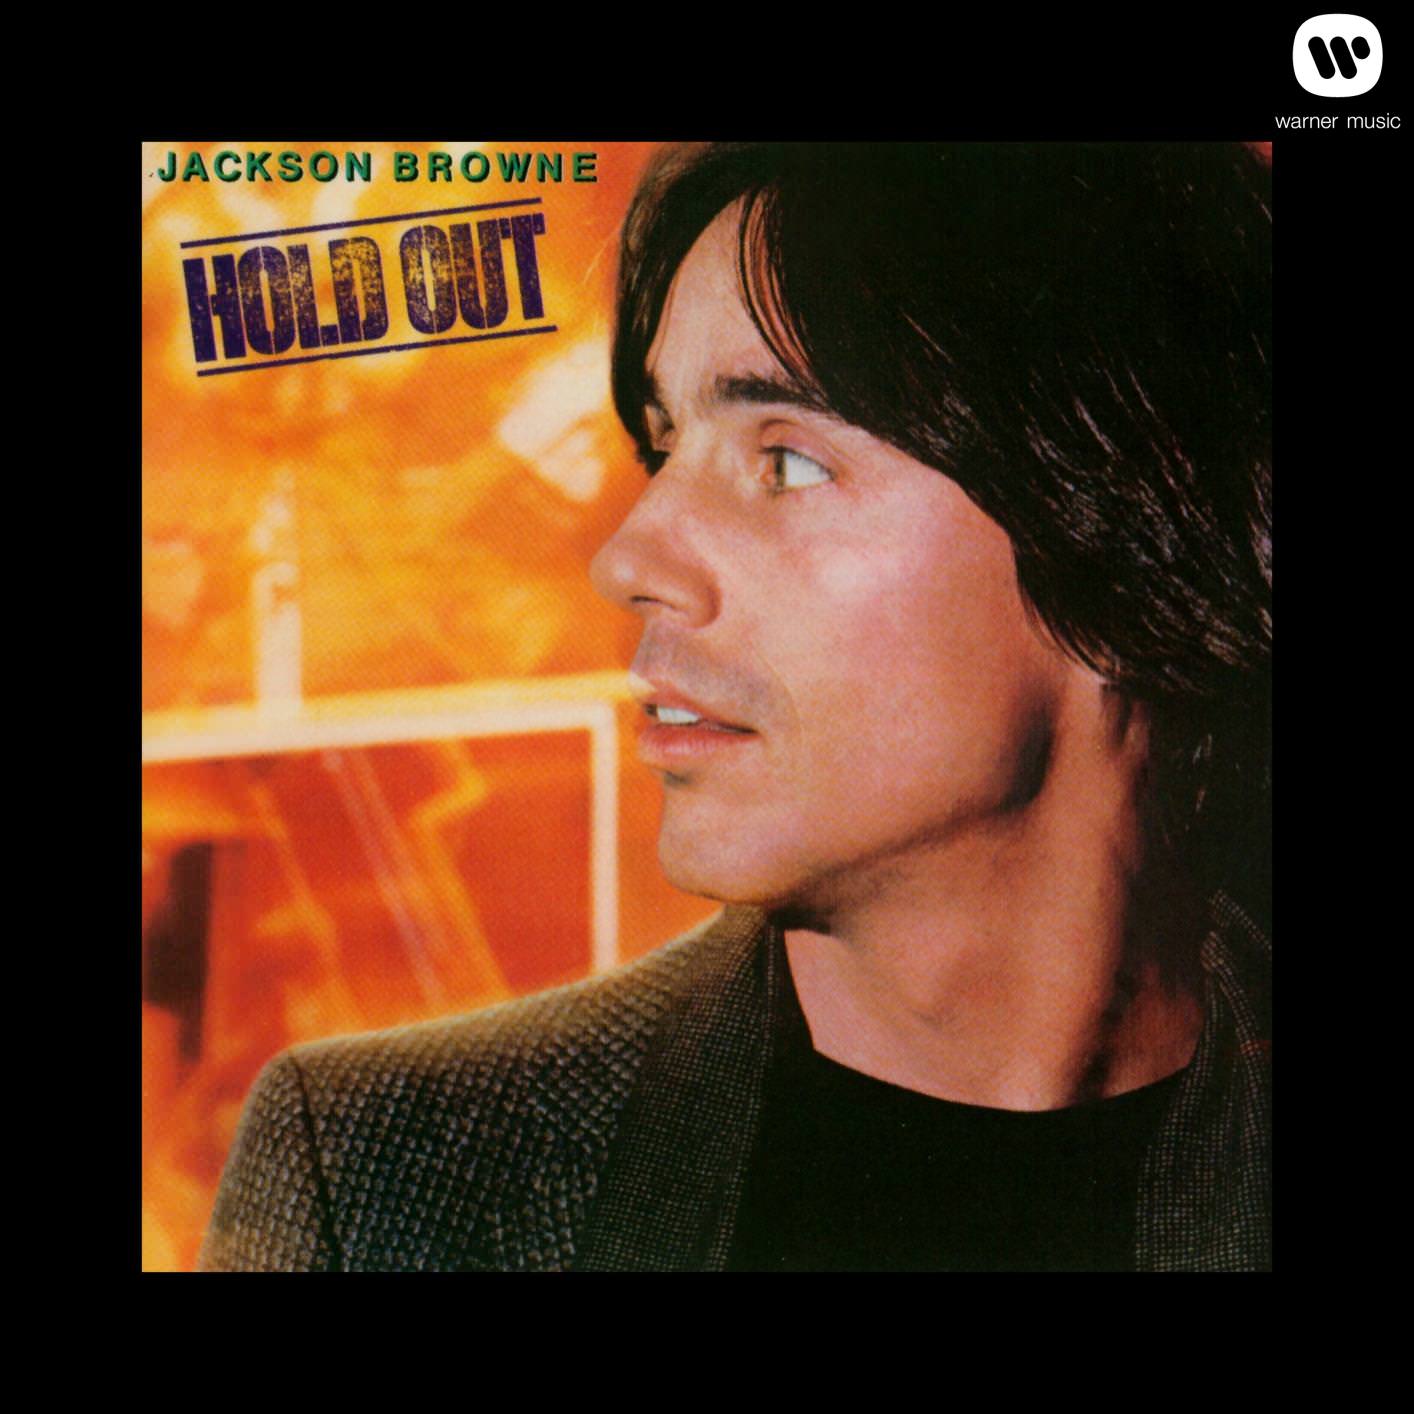 Jackson Browne - Hold Out (1980/2013) [FLAC 24bit/192kHz]